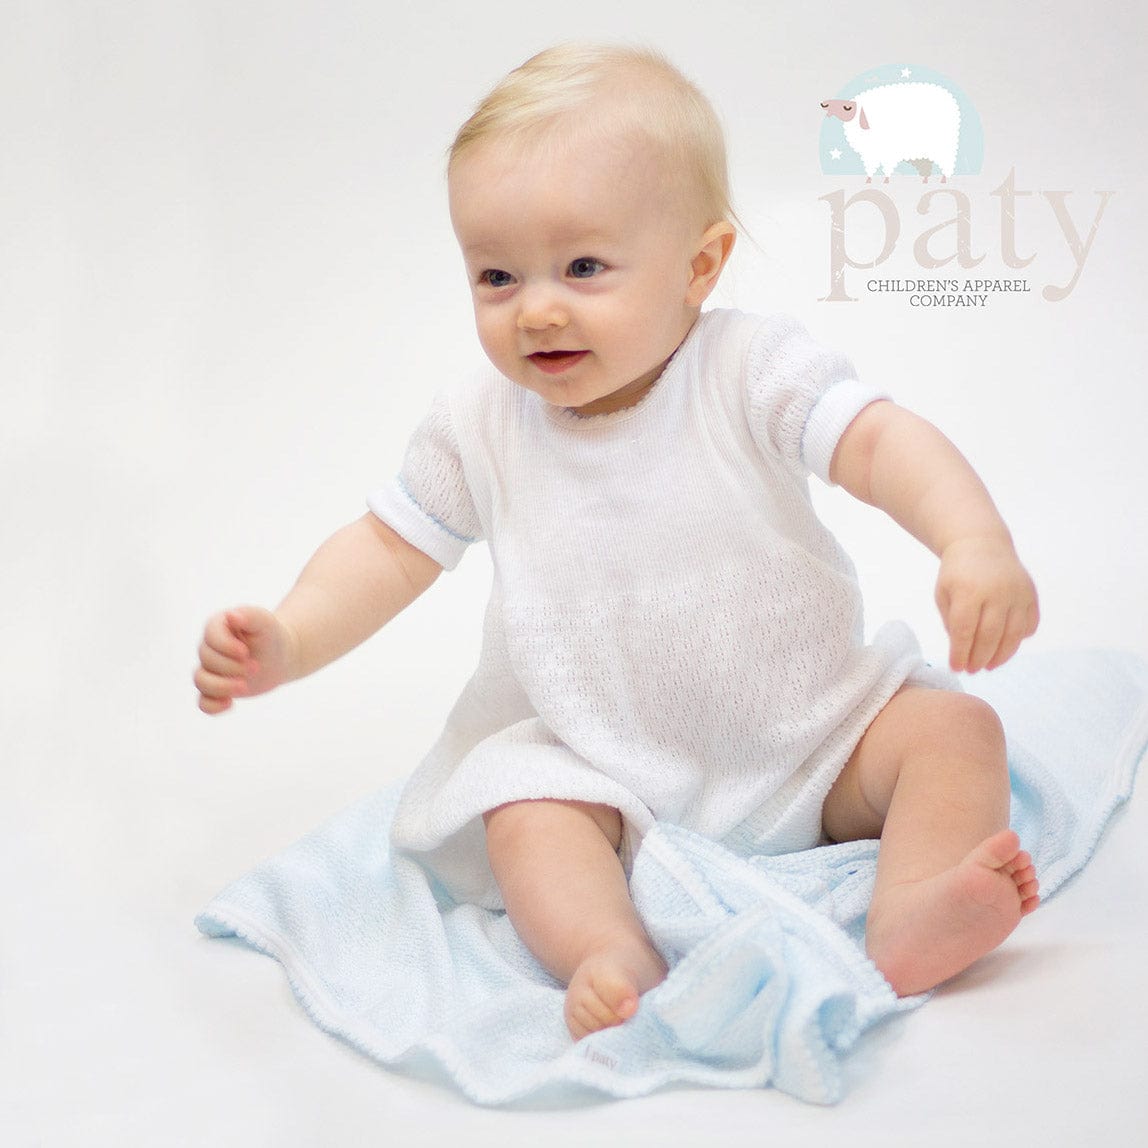 Paty, Inc. Paty Short Sleeve Cuffed White Bubble with White Trim - Little Miss Muffin Children & Home